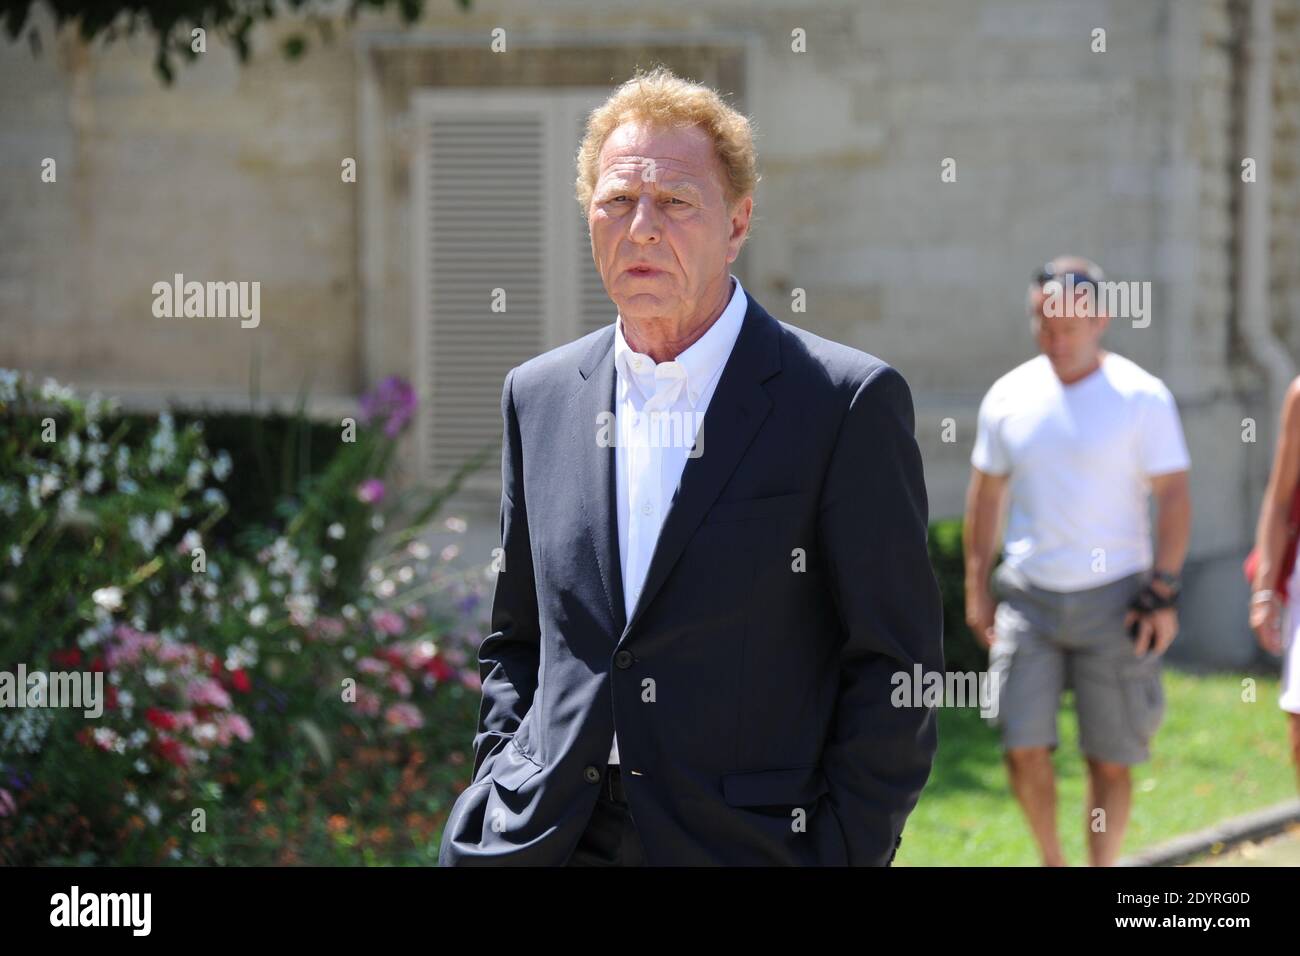 Robert Namias attending the funeral of French actress Valerie Lang at the Montparnasse cemetery in Paris, France on July 25, 2013. Valerie Lang, the daughter of French former Culture minister Jack Lang, died on July 22 aged 47 following a long illness. Photo by Alban Wyters/ABACAPRESS.COM Stock Photo